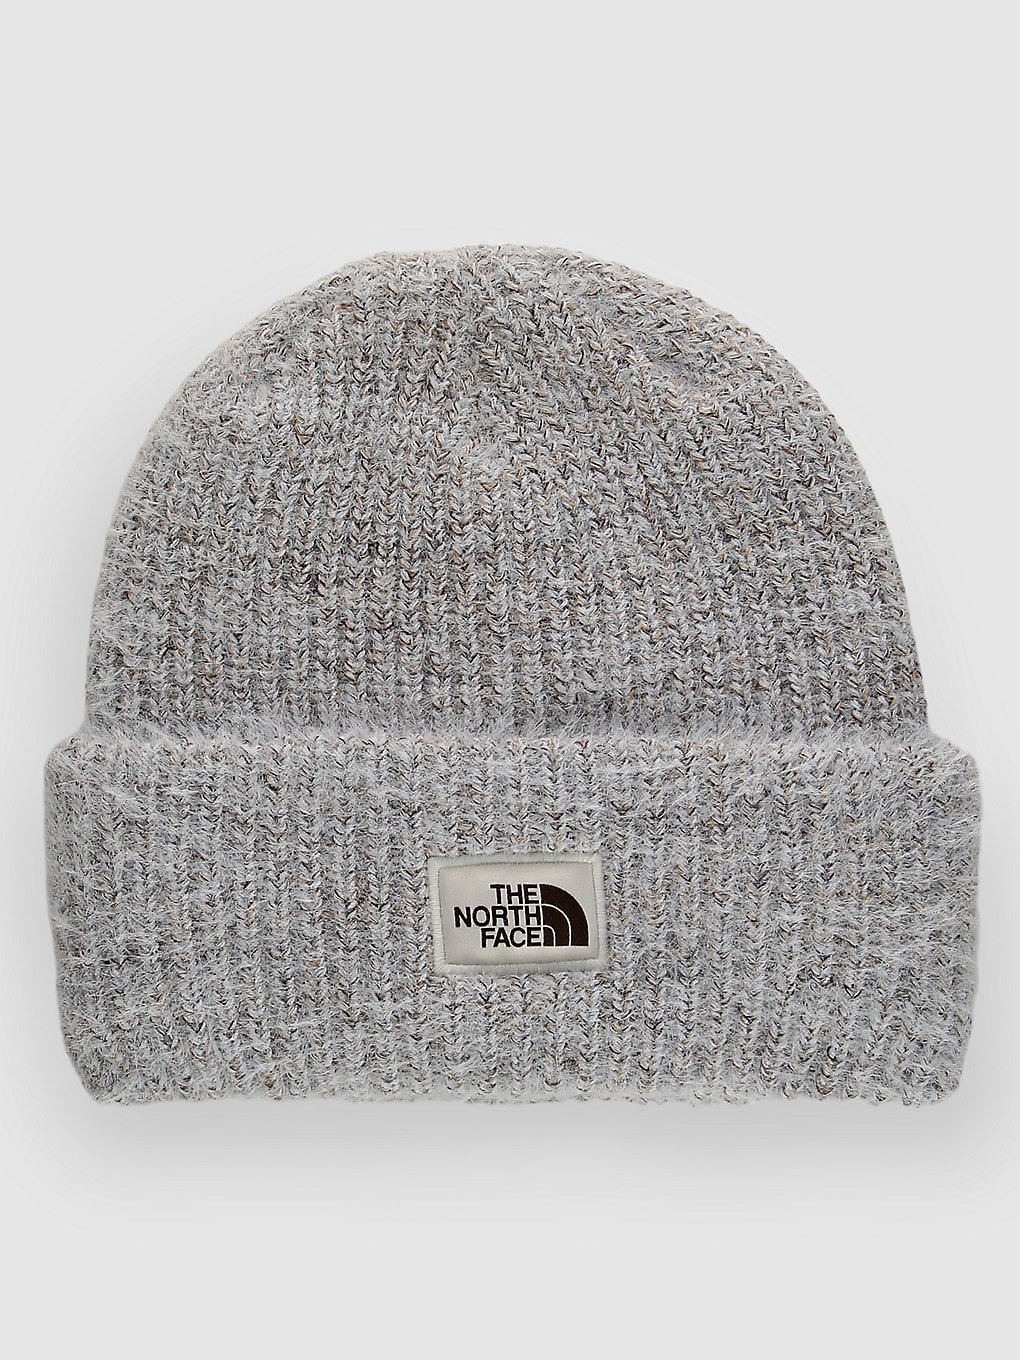 THE NORTH FACE Salty Bae Lined Beanie dusty periwinkle kaufen